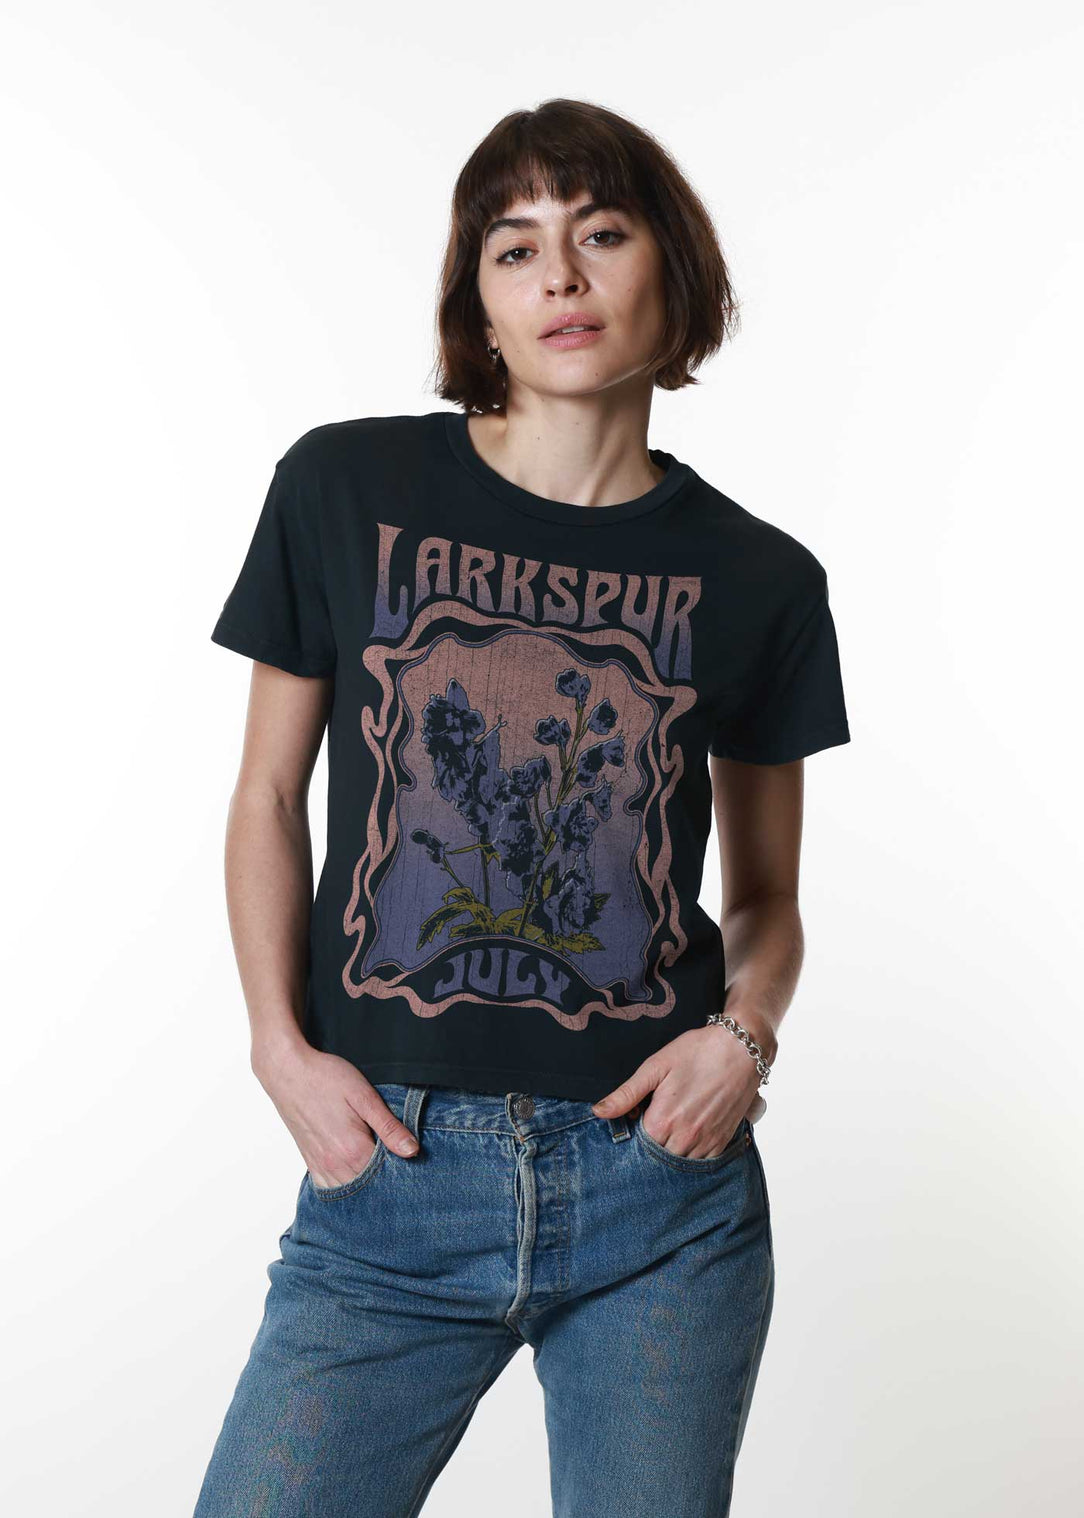 July Larkspur Psychedelic Black Classic Tee